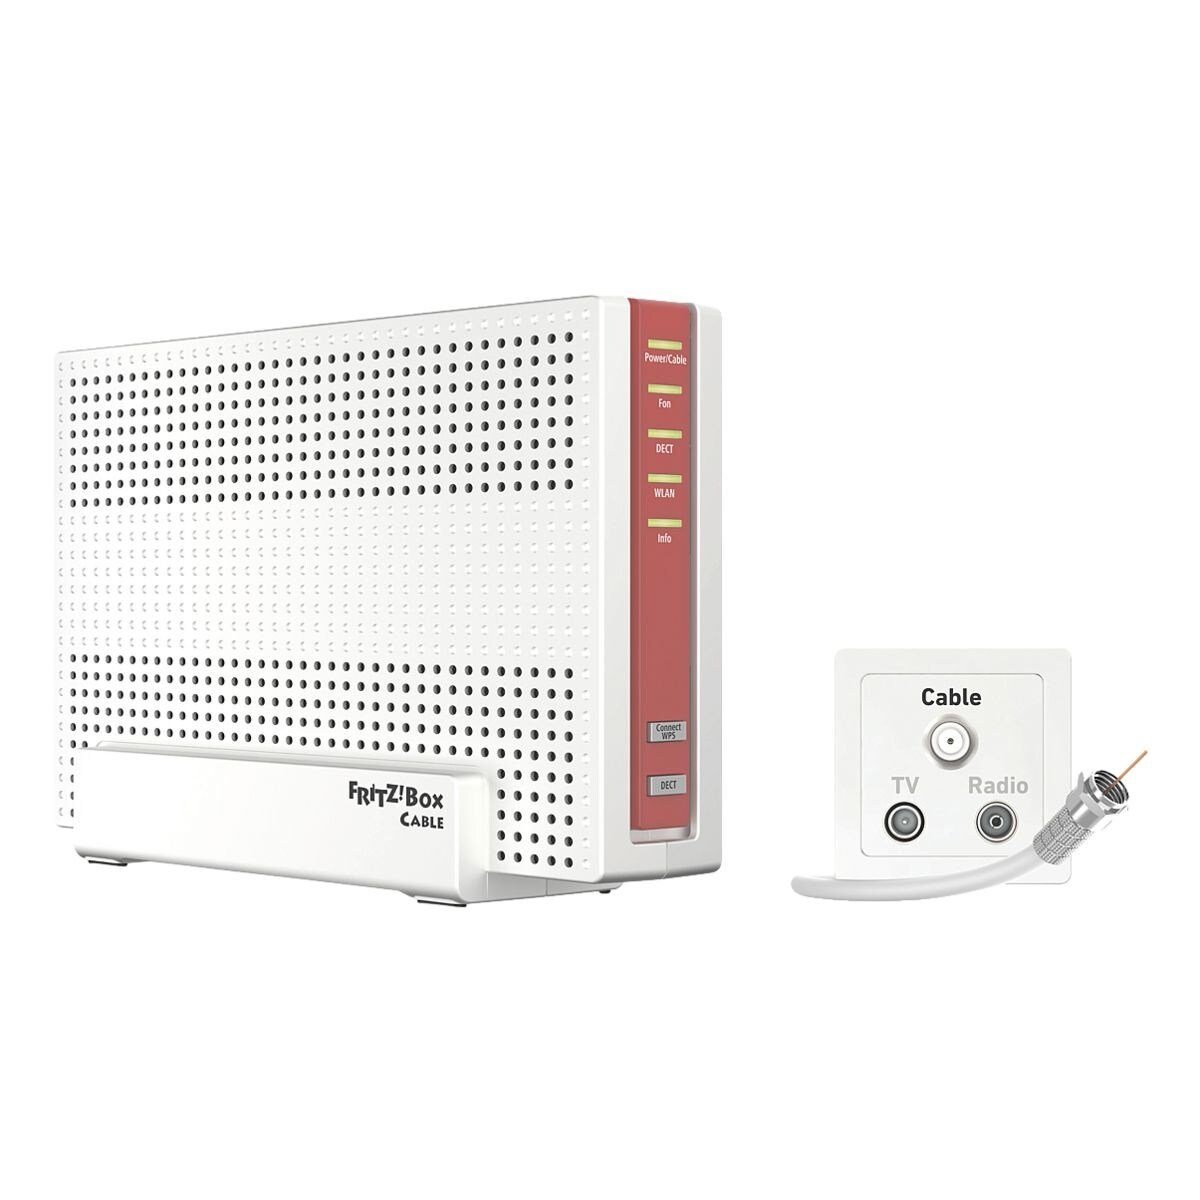 FRITZ!Box Multi-User-MIMO Cable WLAN-Router, N AC mit 6591 AVM + WLAN